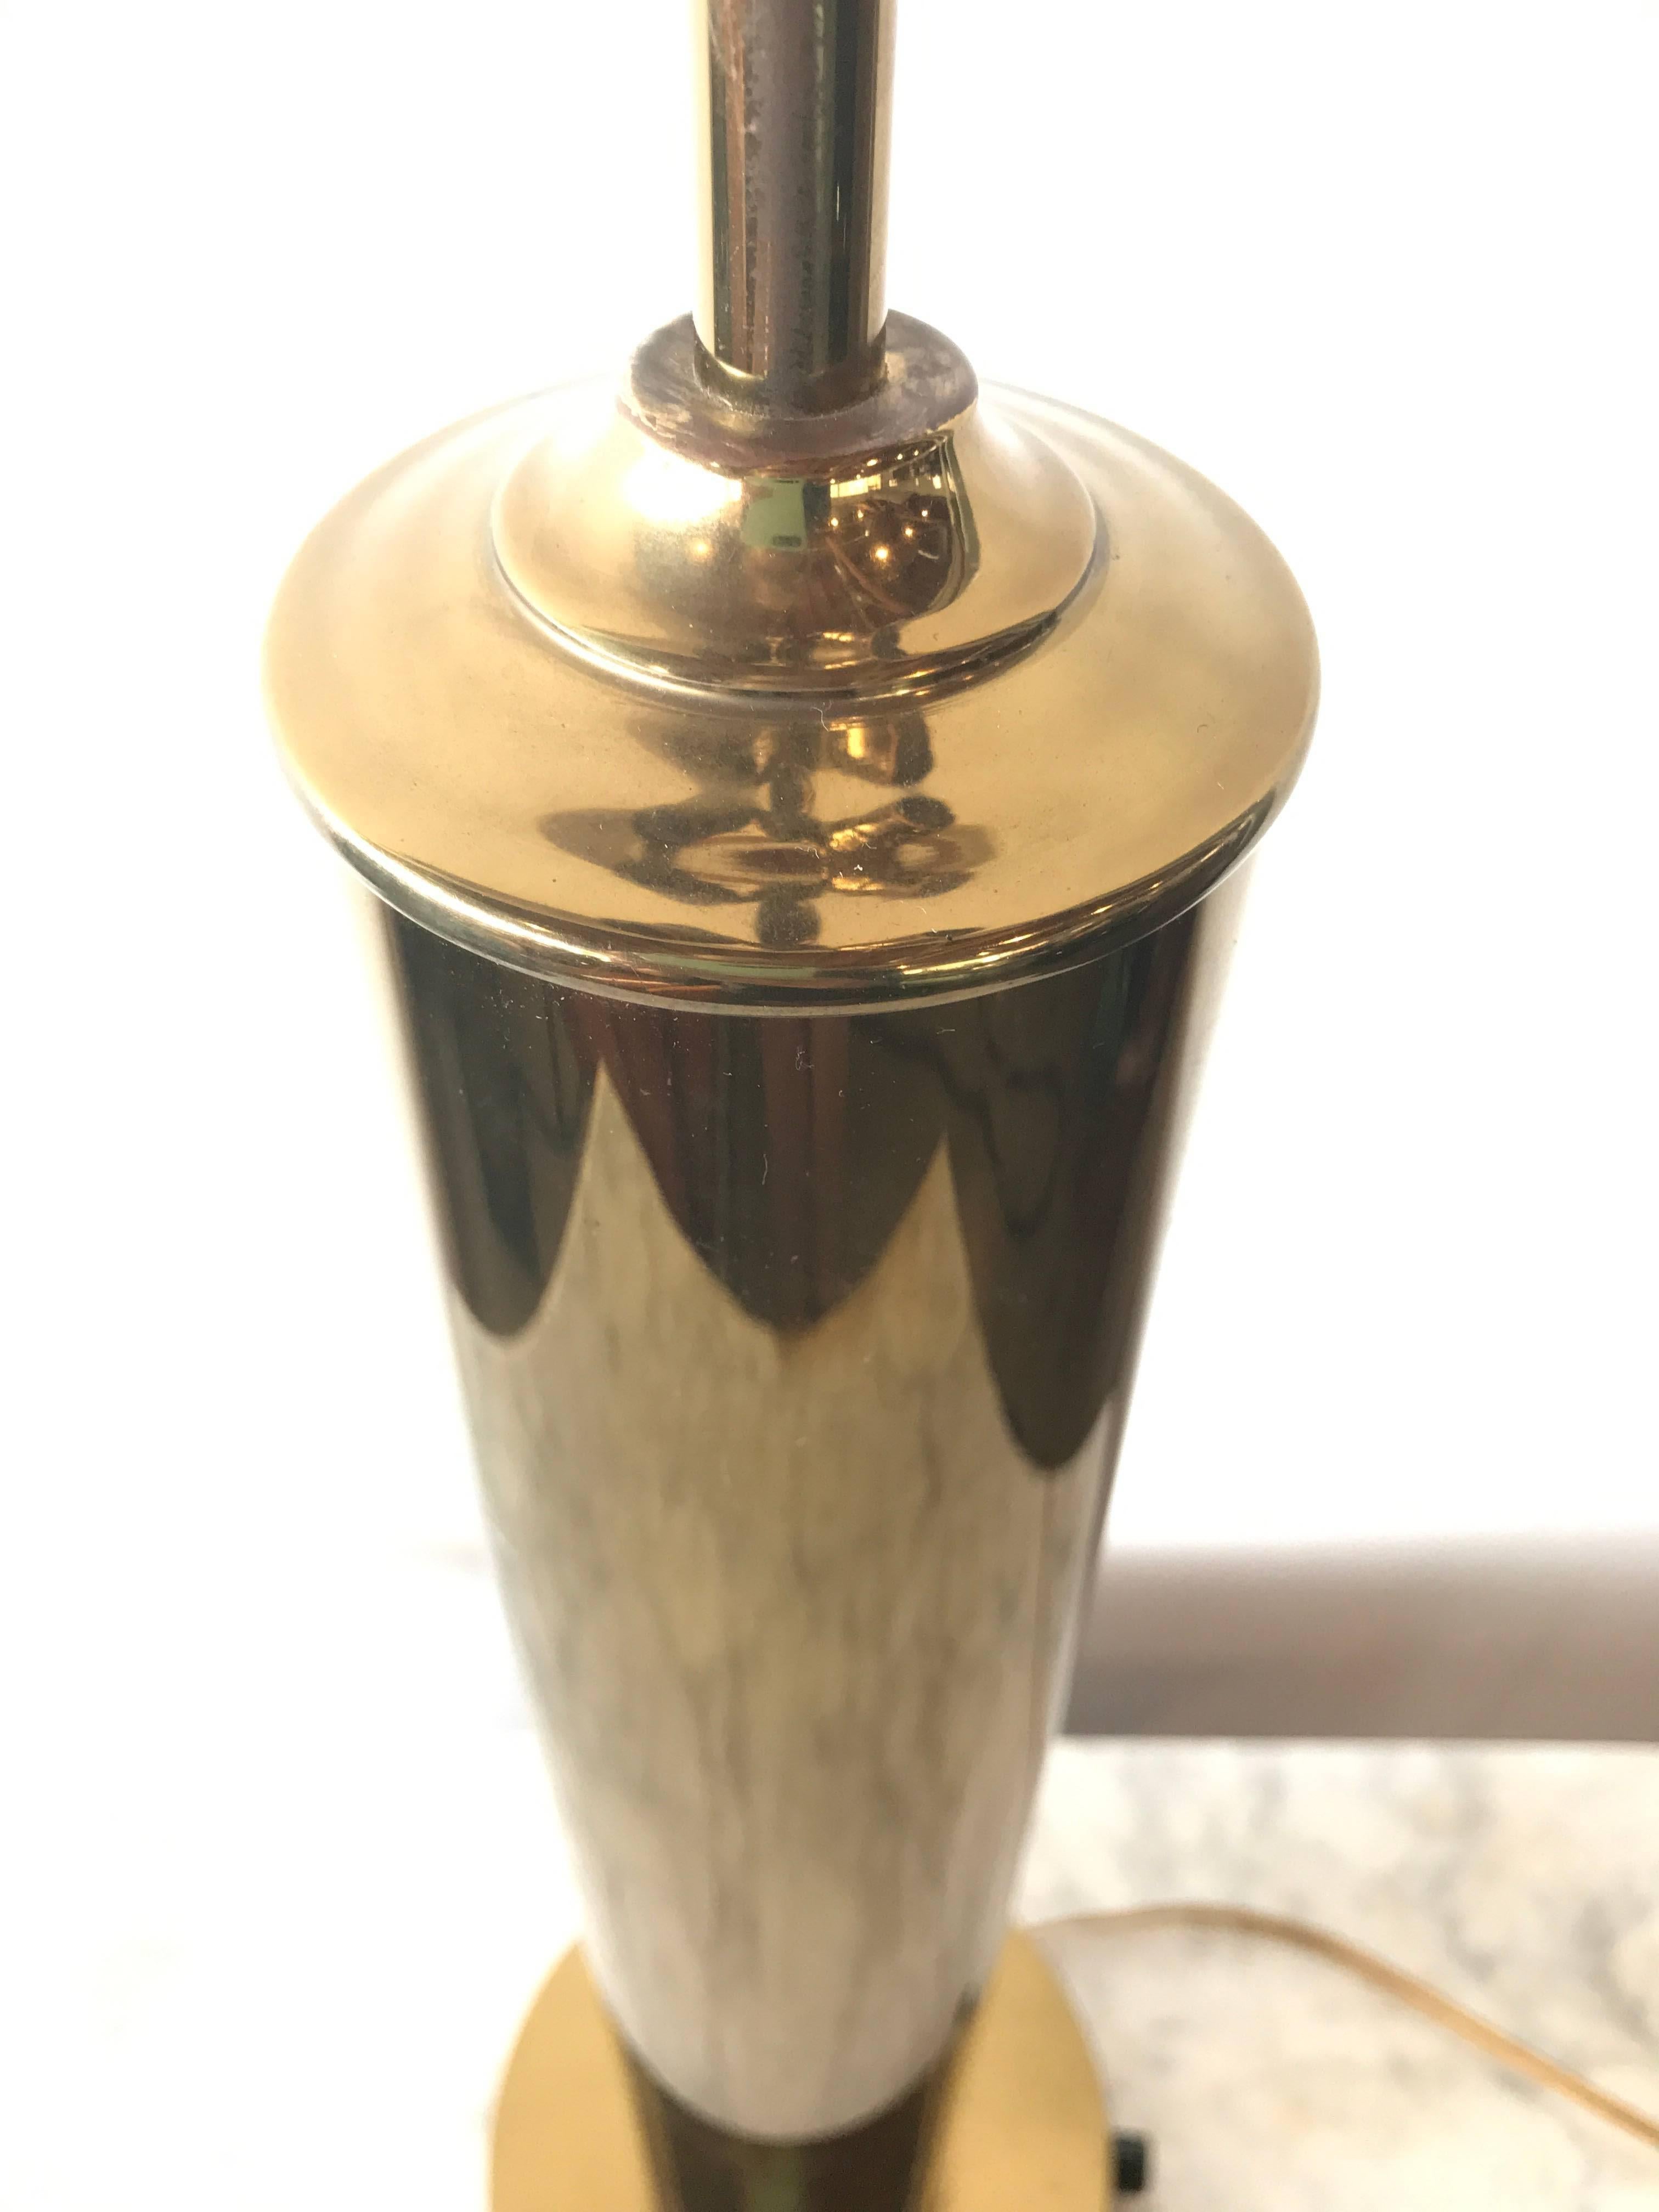 Get your hands on some highly coveted brass, one of the current top trends, with this tall and slender table lamp. The simple clean lines make this piece highly adaptable to fit into a number of spaces and fulfill many lighting needs. 

This table